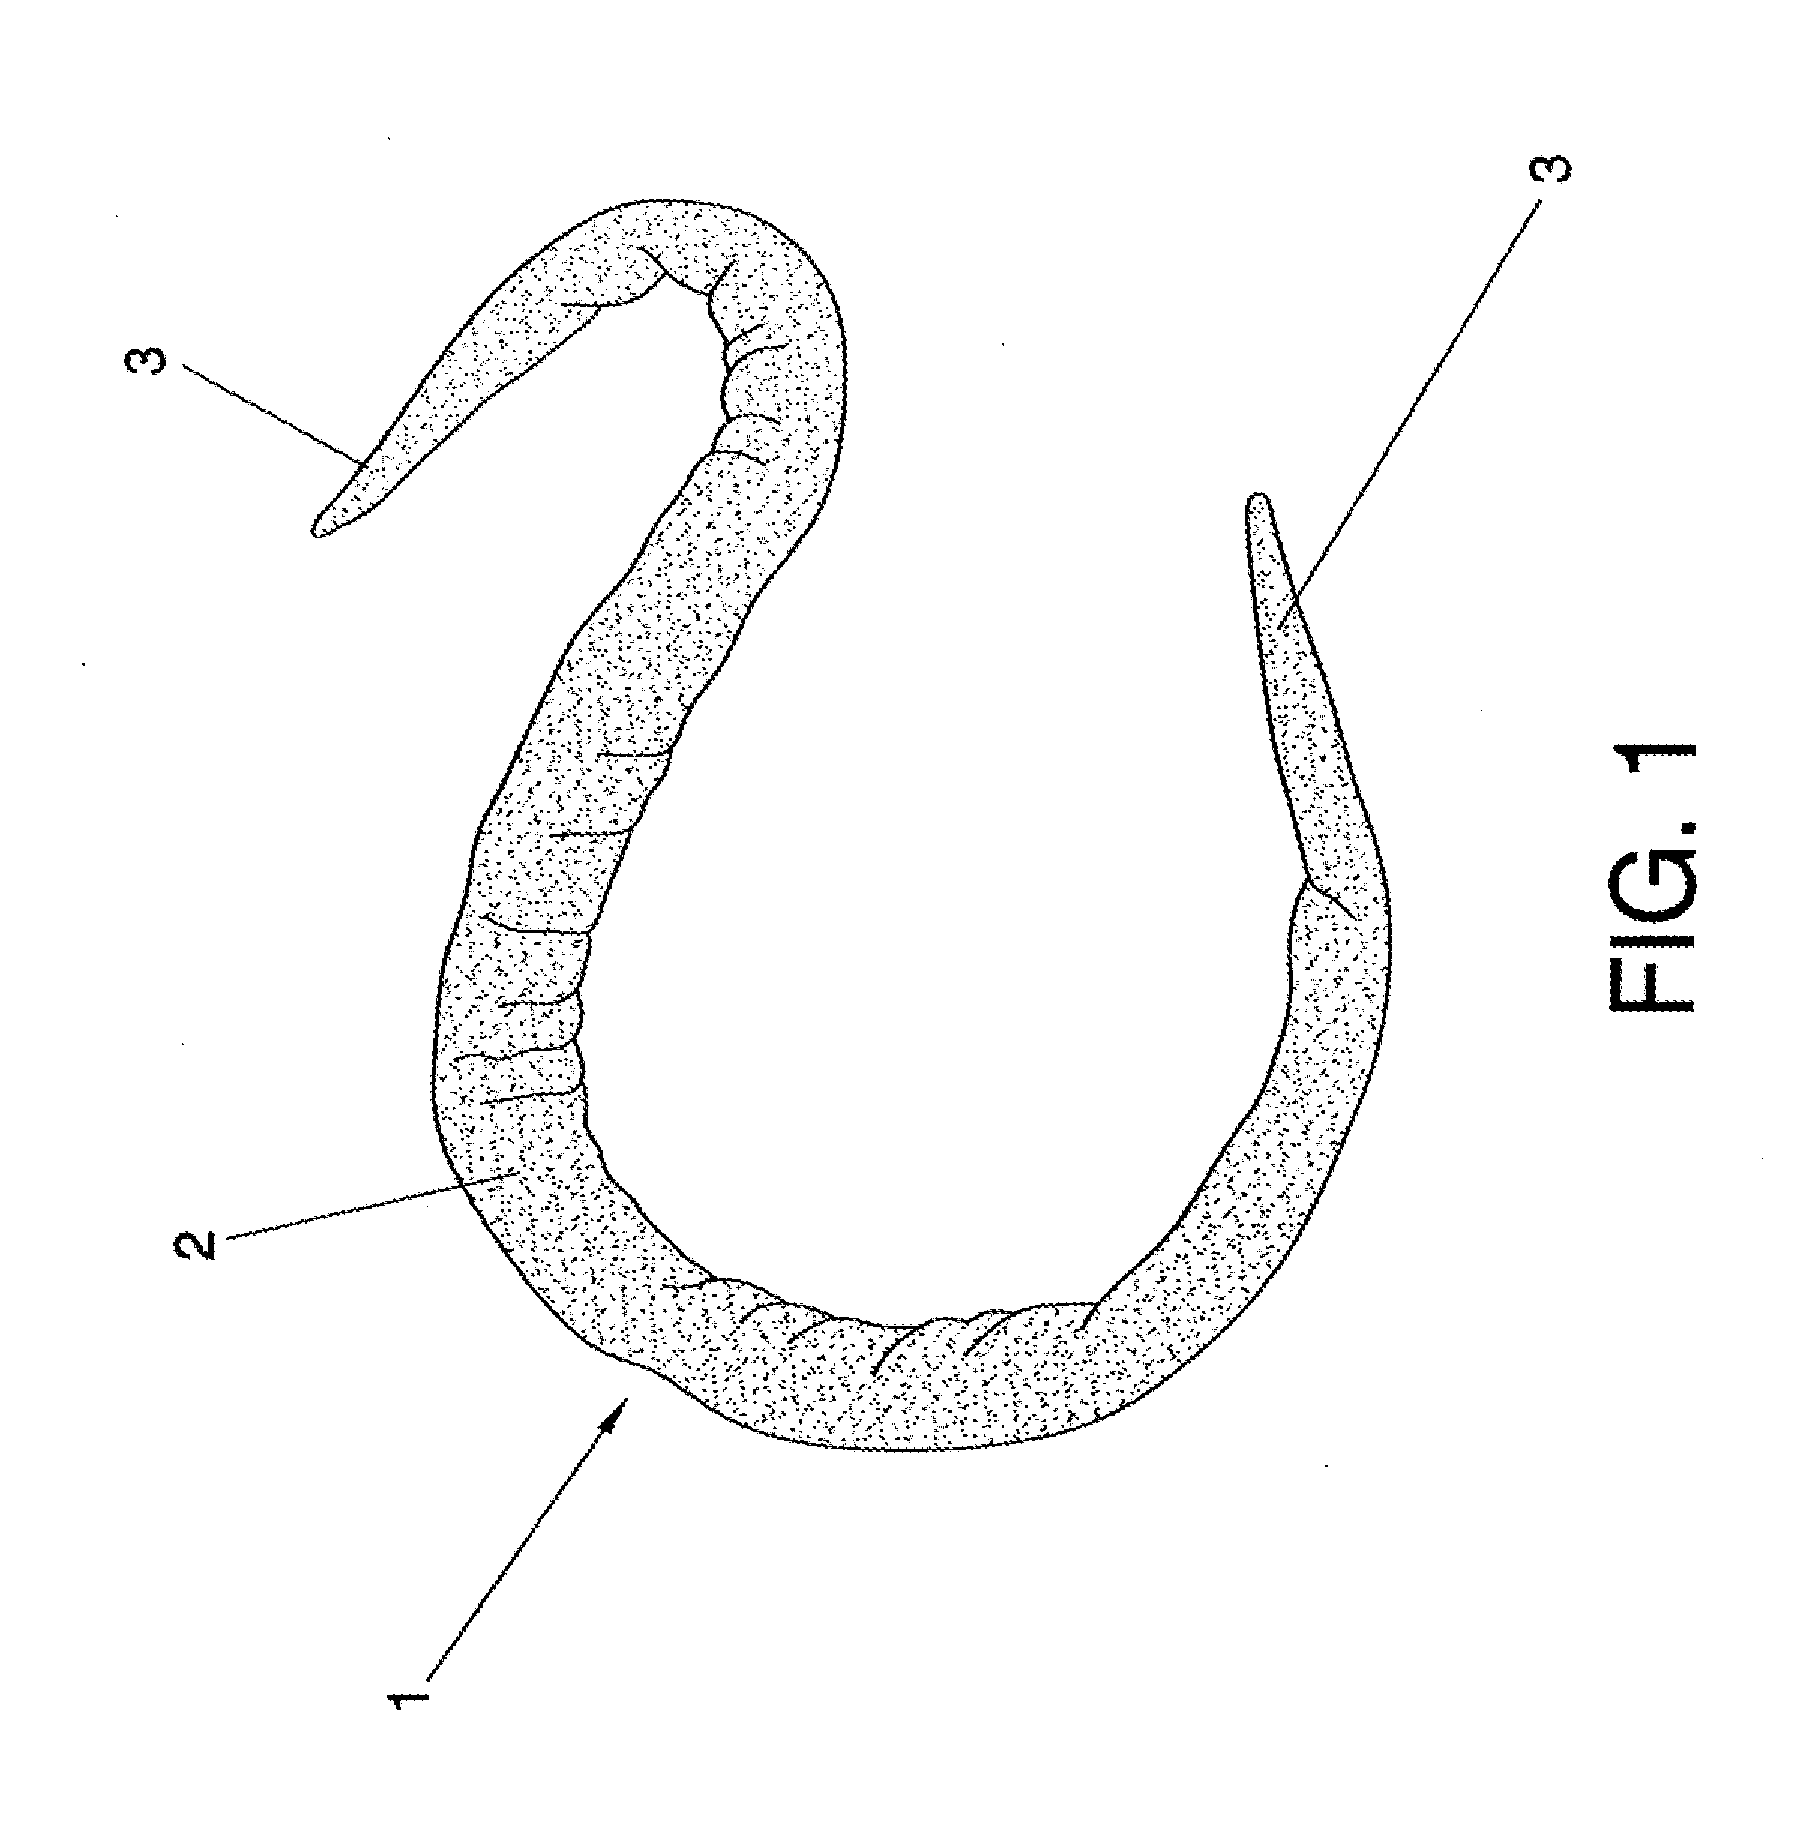 Device for removing people in a life-threatening situation and method for use